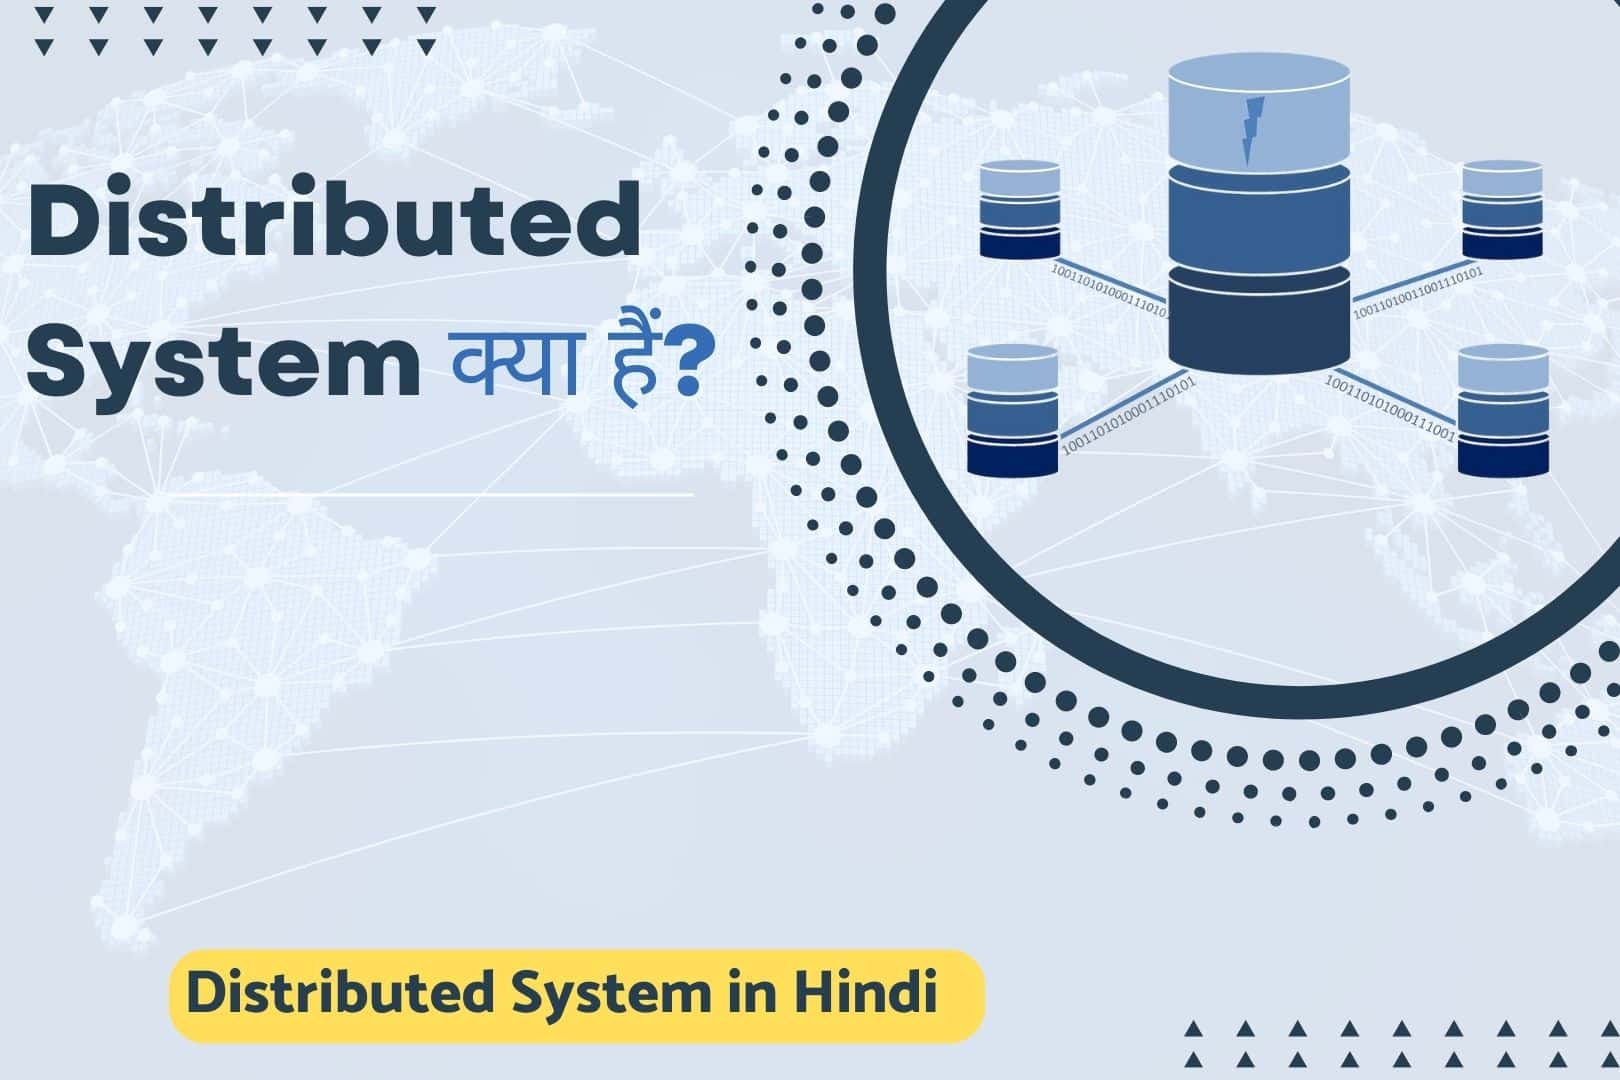 Distributed System in Hindi - Distributed System Kya Hai